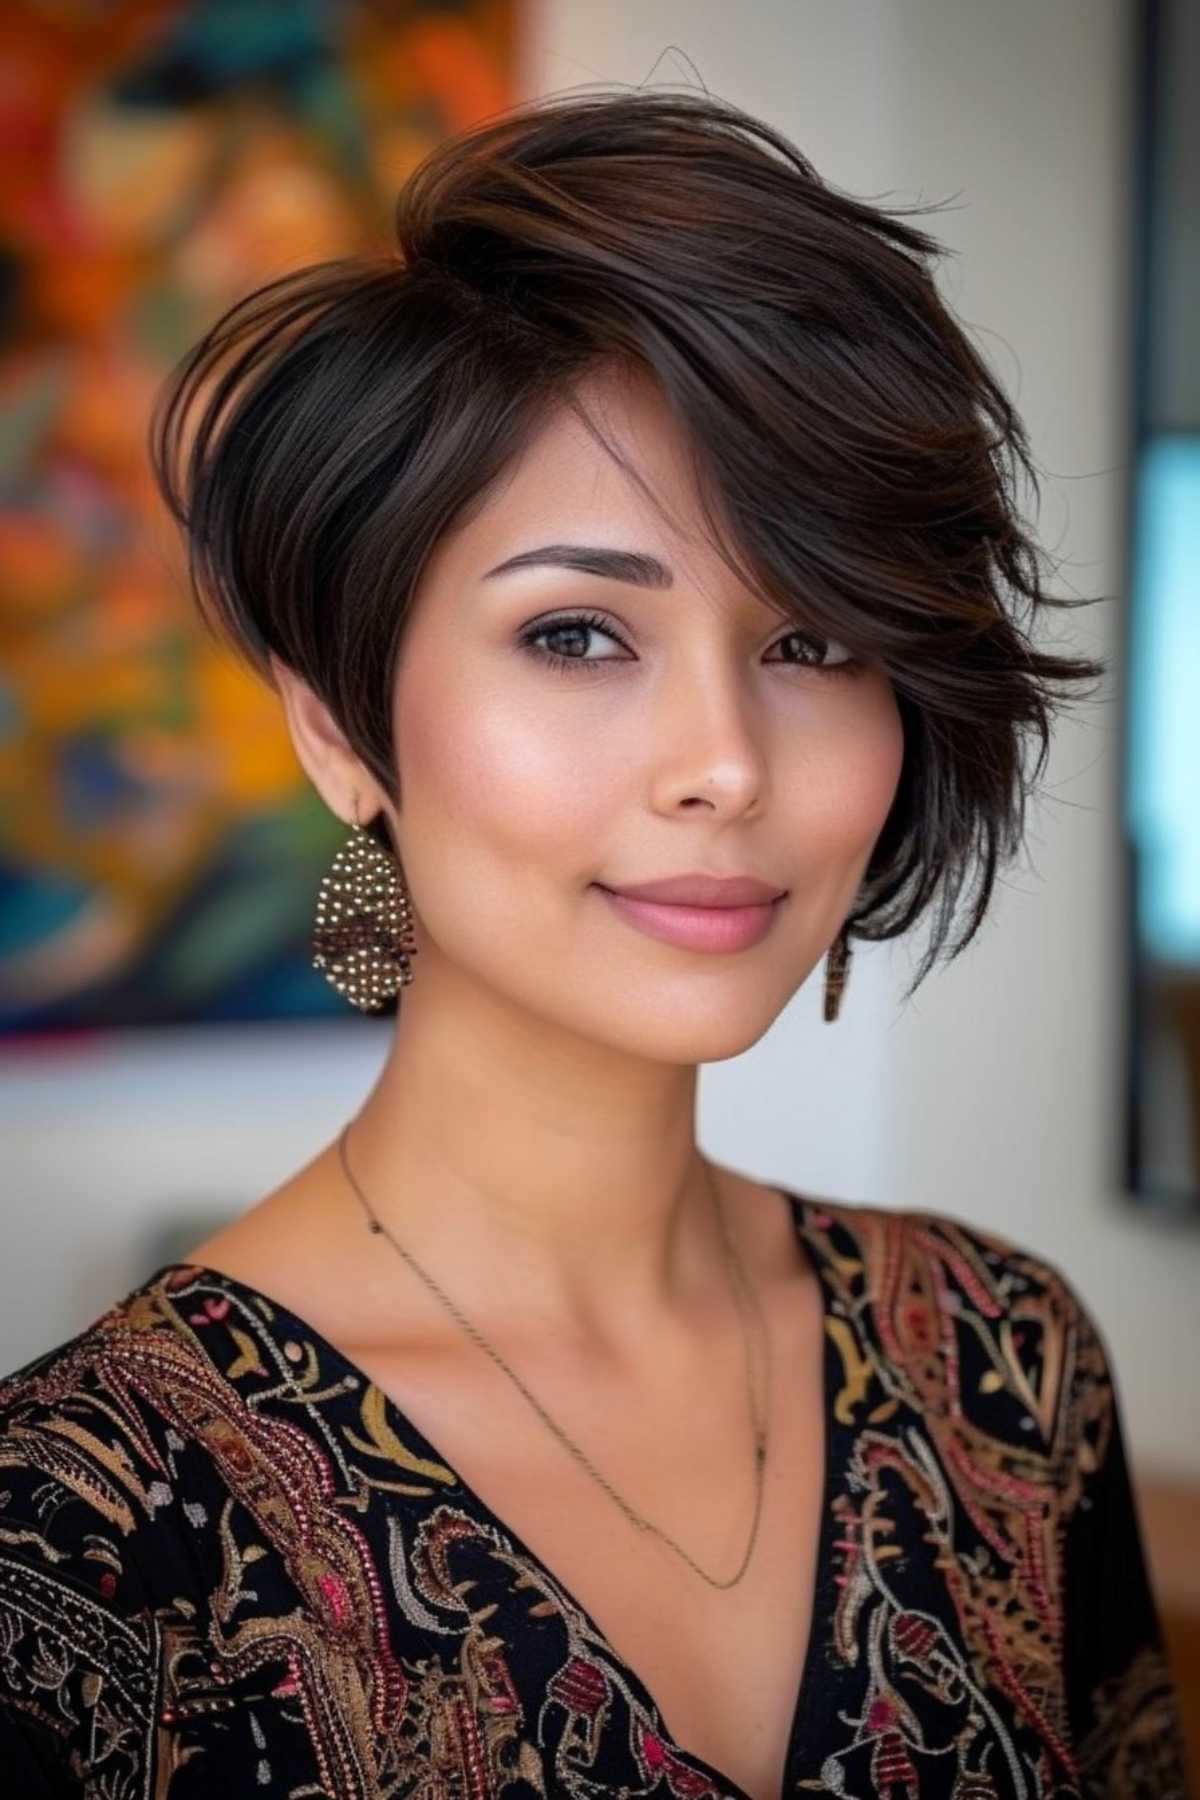 A sassy pixie bob with a side sass, perfect for everyday glamour